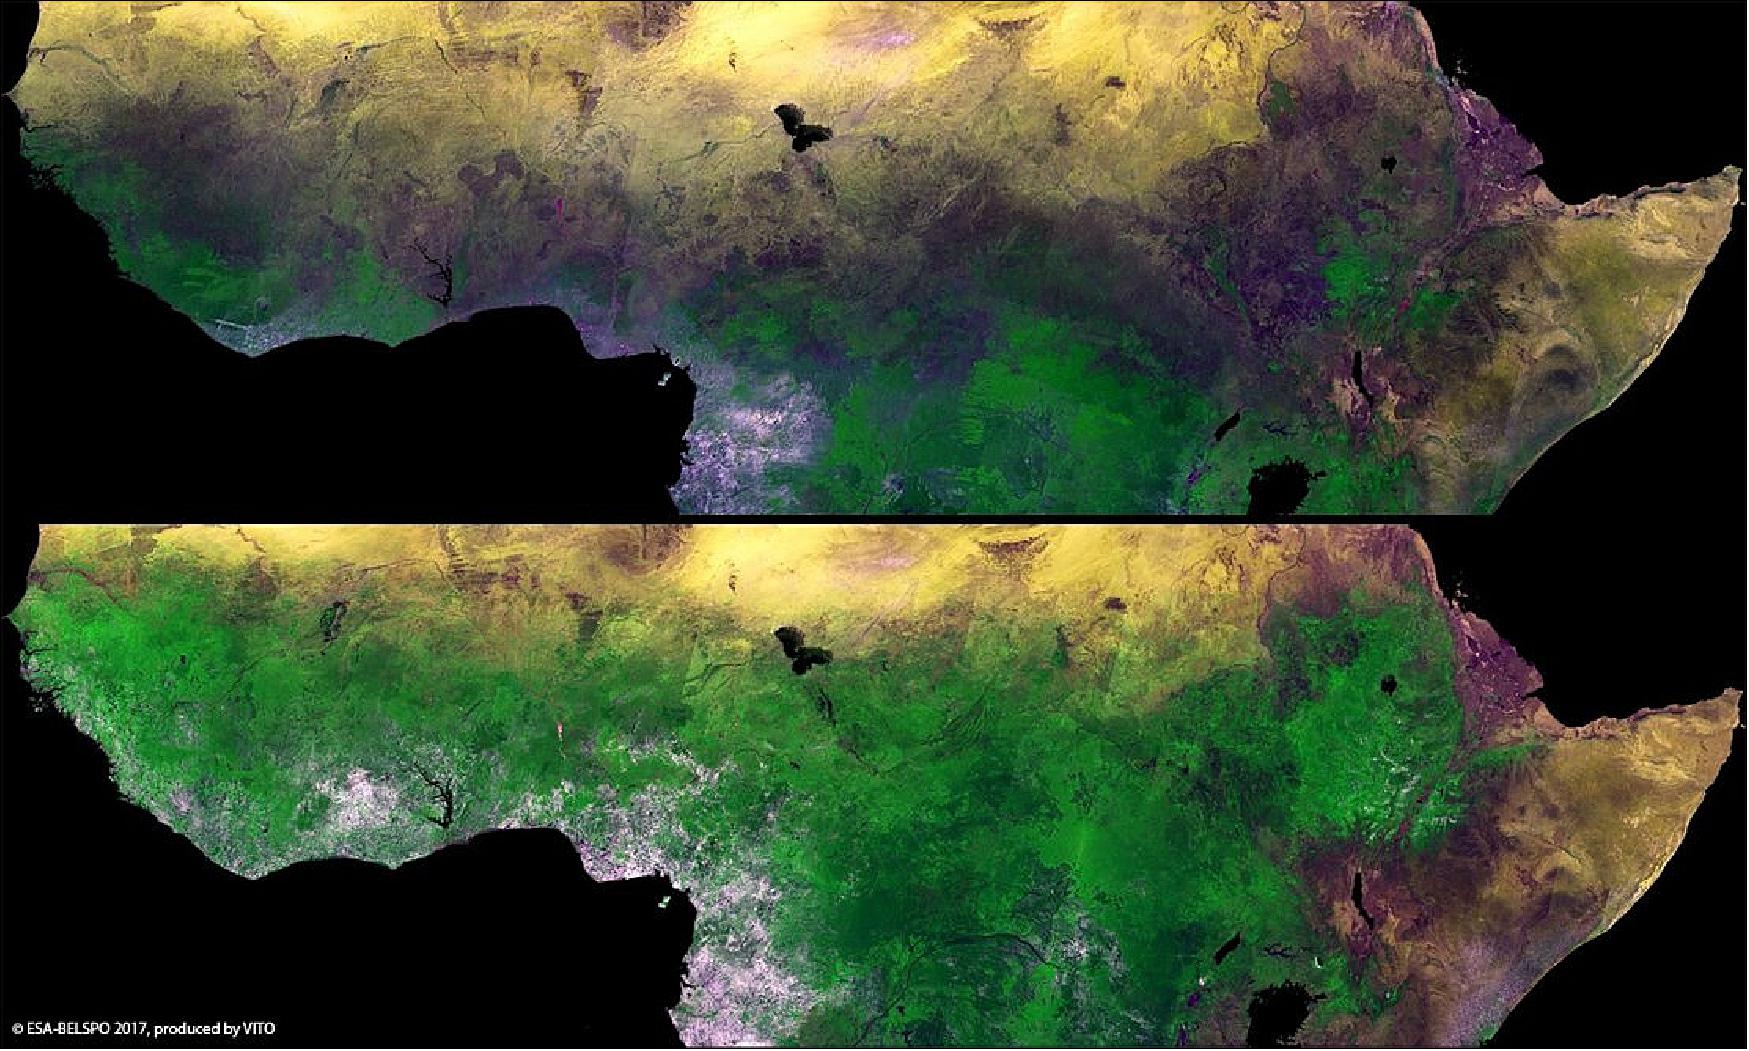 Figure 37: Technology image of the week: ESA's Proba-V minisatellite shows vegetation bloom across the African Sahel with the coming of the rainy season (image credit: ESA/Belspo – produced by VITO)